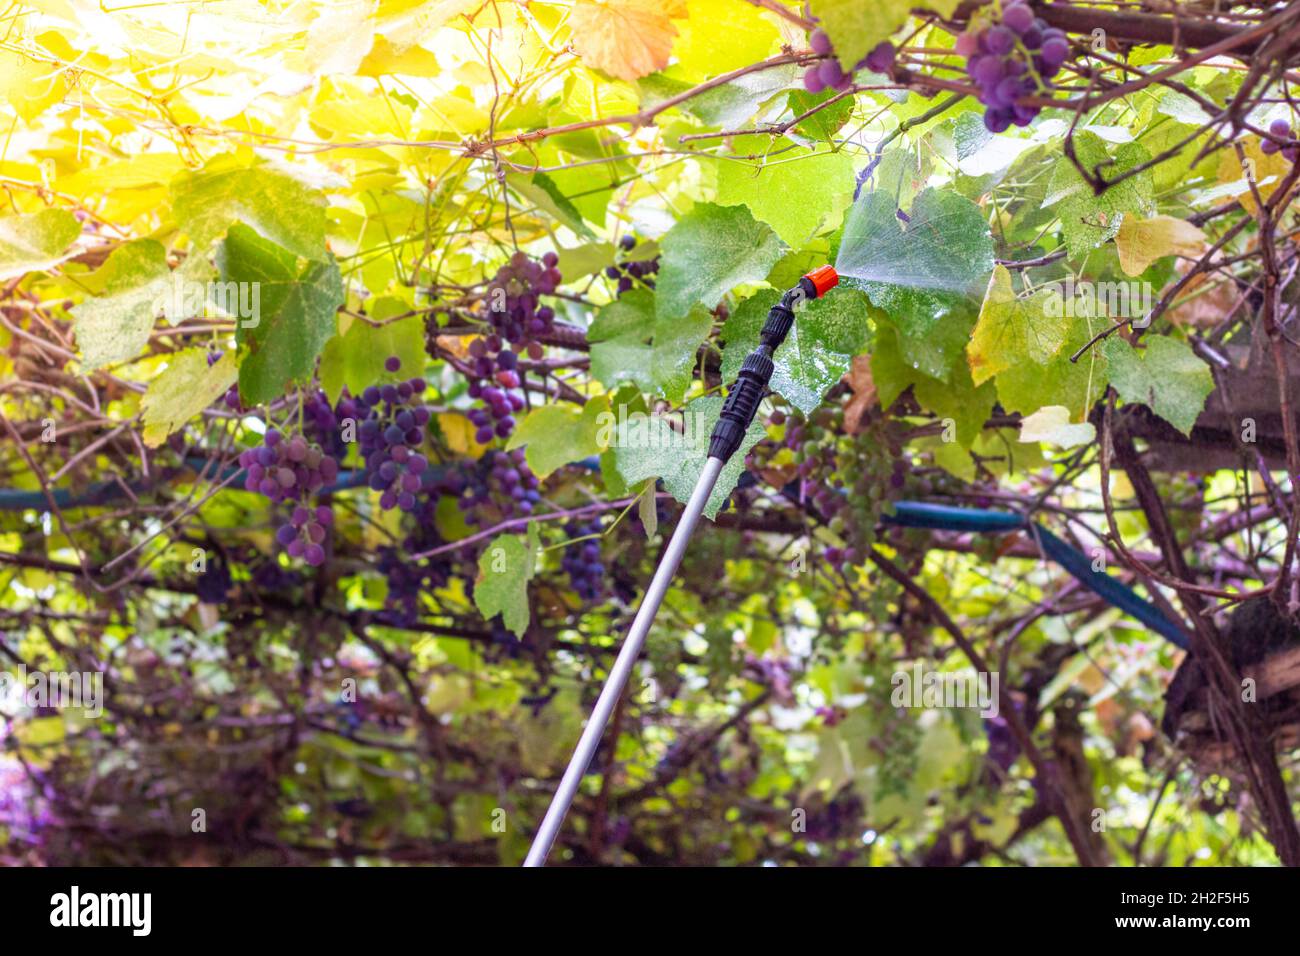 farmer spraying grapes with a solution against parasites Stock Photo